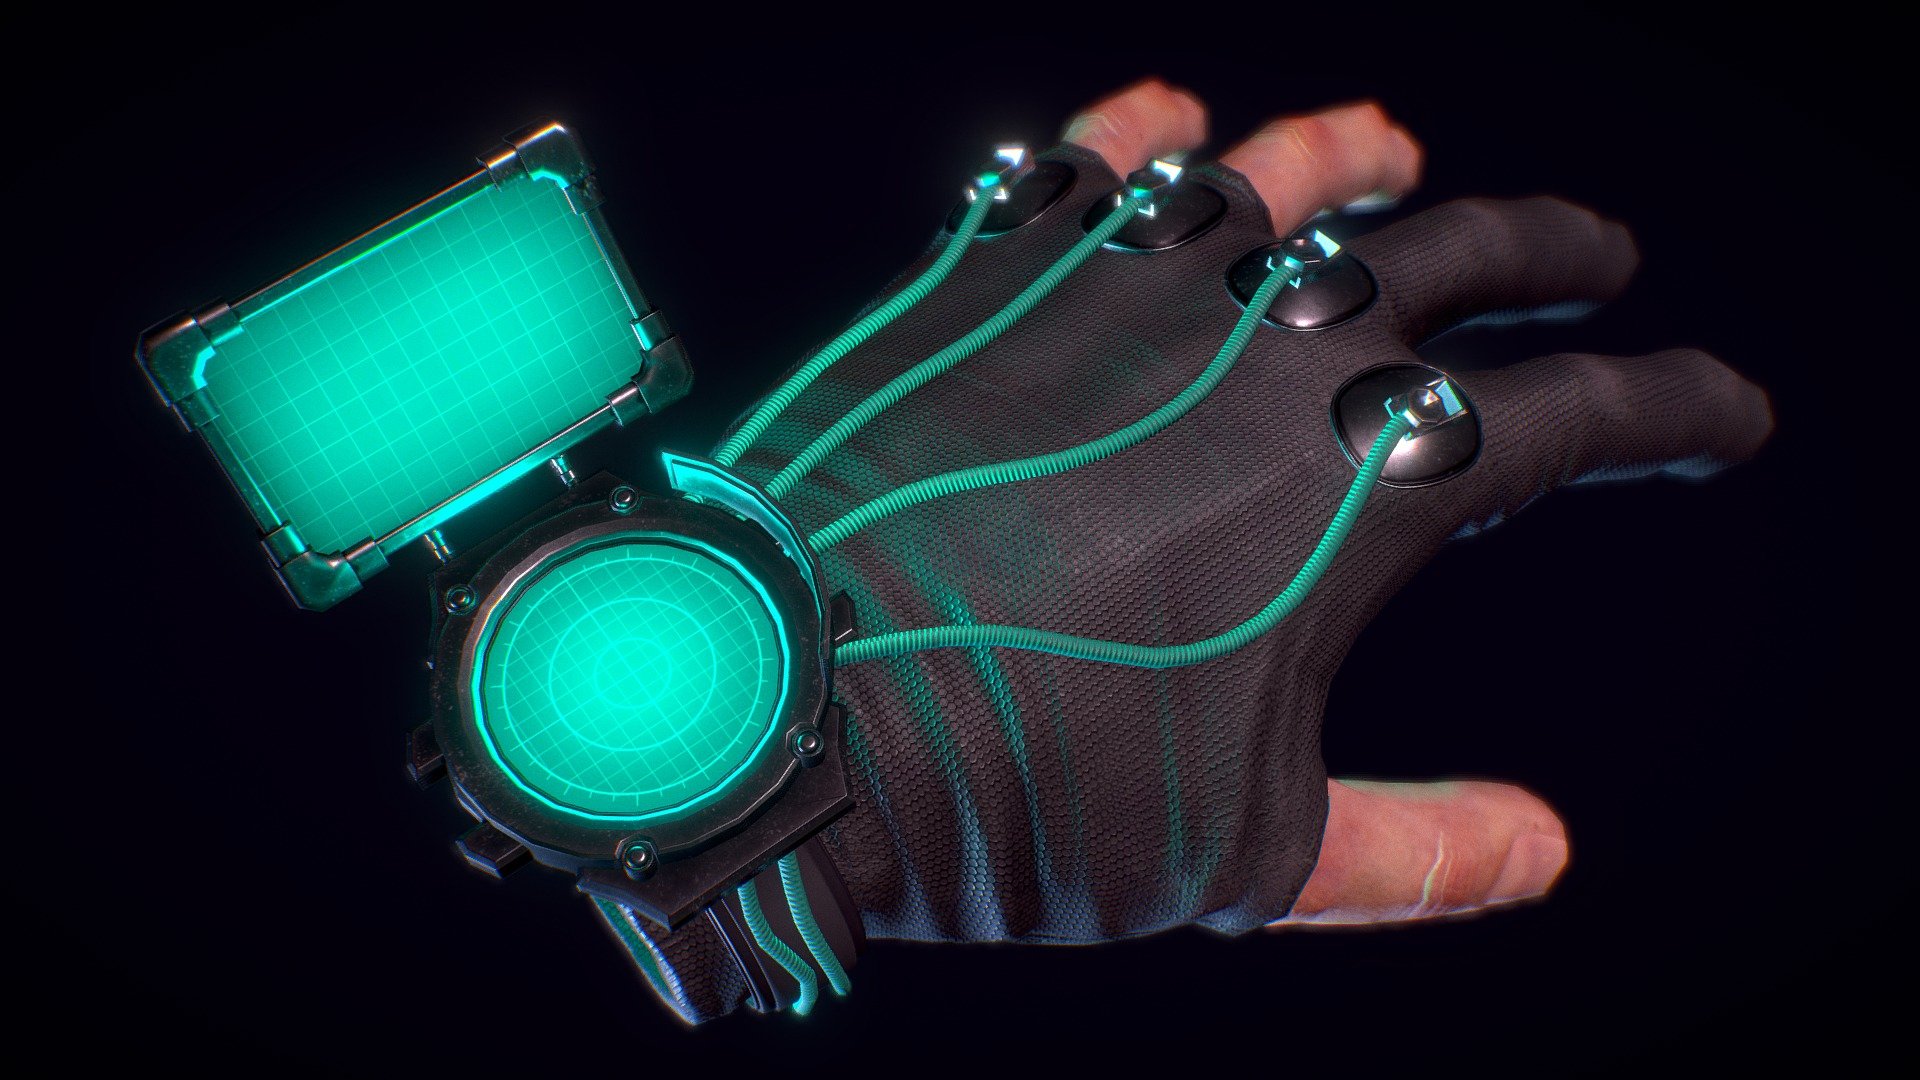 This is a hand model I have created and rigged for the game Cortex, a VR arcade game I am creating in a team for my final project at university. 
I wanted a scifi feel and a device to have the HUD integrated in a natural feeling way. This is the left hand for our character and will feature on-screen throughout gameplay 3d model